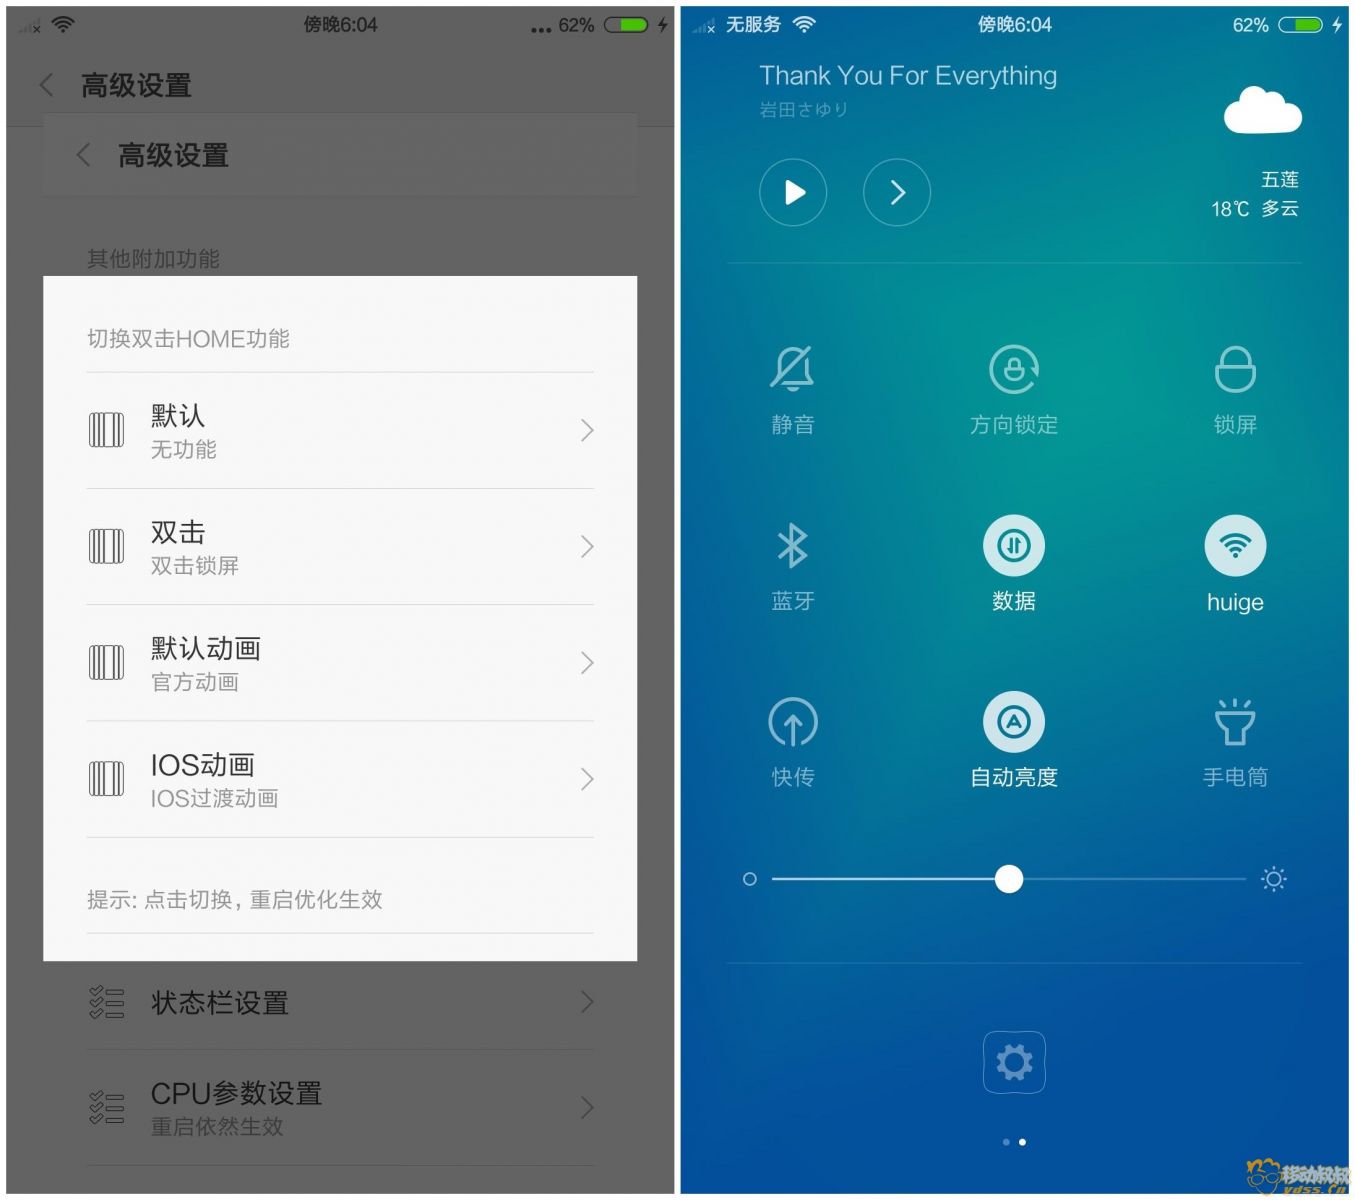 ROM MIUI7.22 stable version